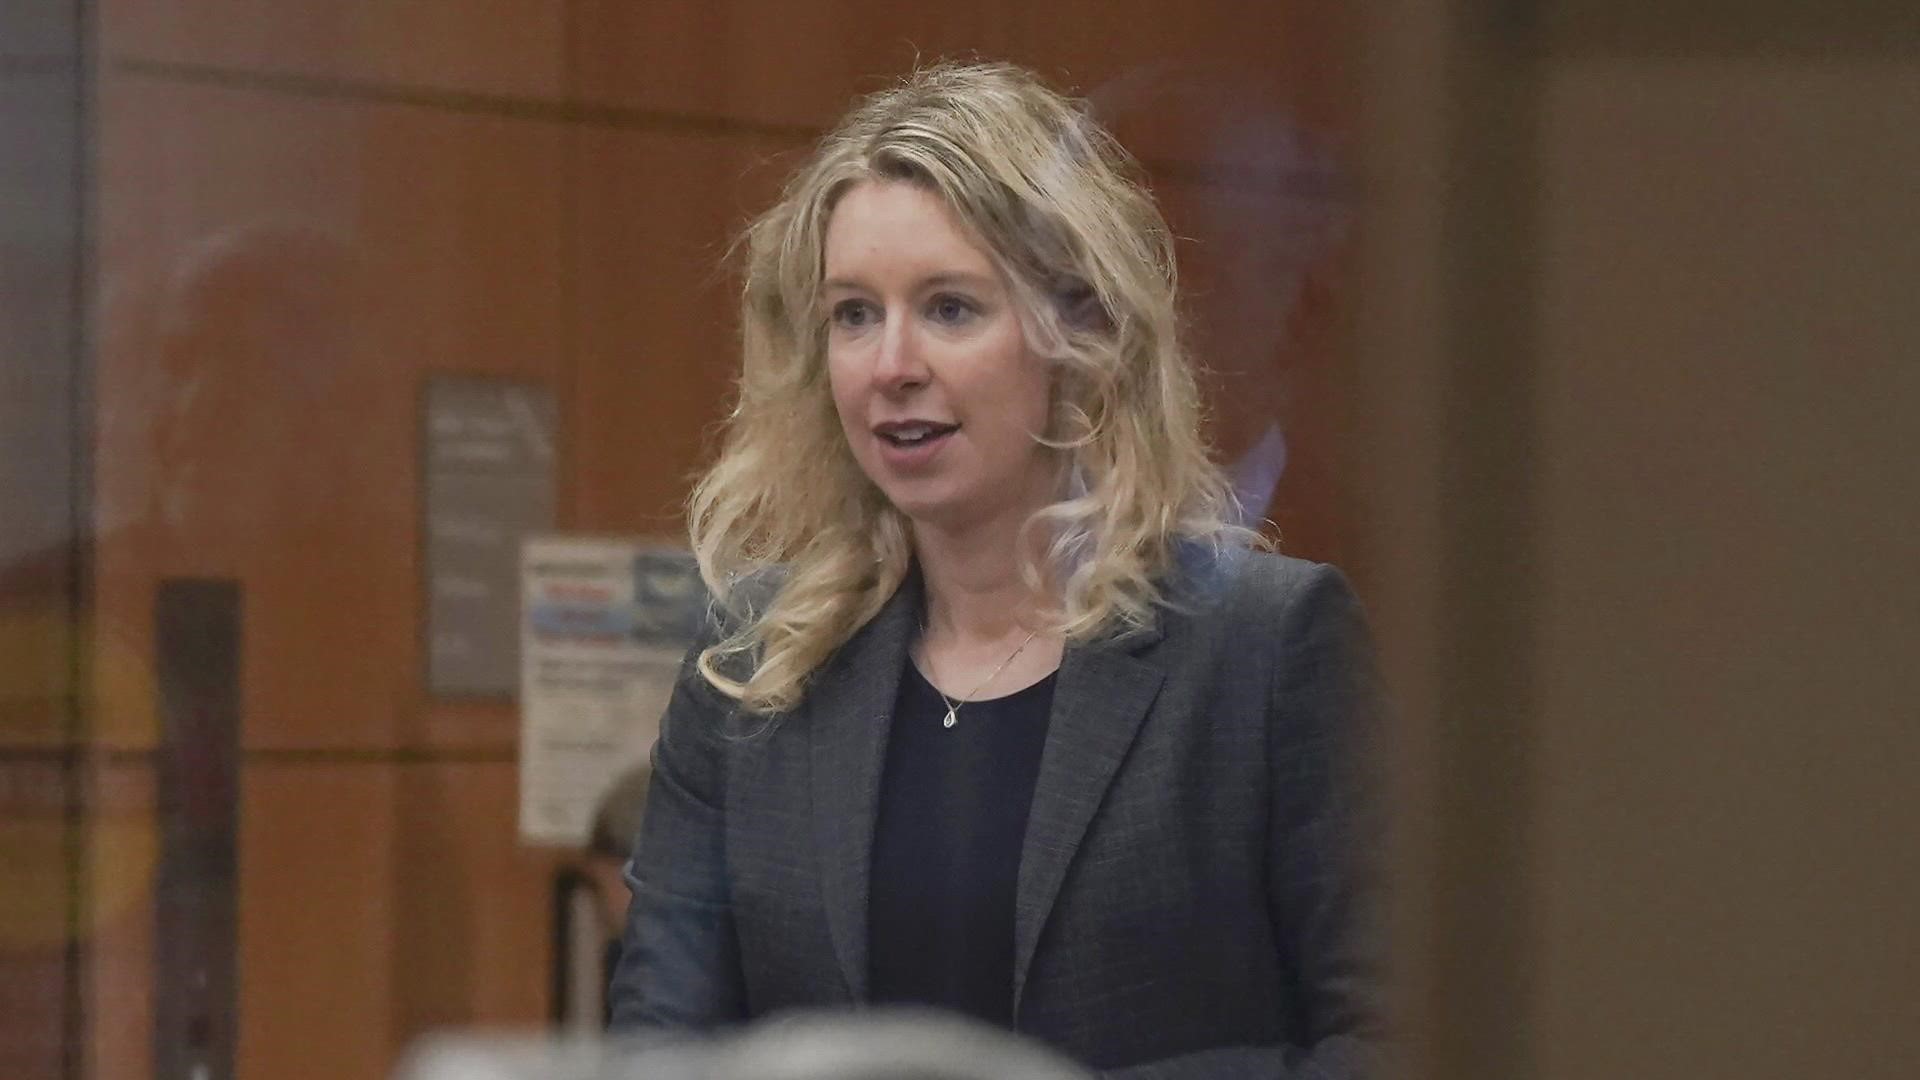 More than 170,000 Arizonans took a Theranos blood test, now its CEO faces years behind bars.